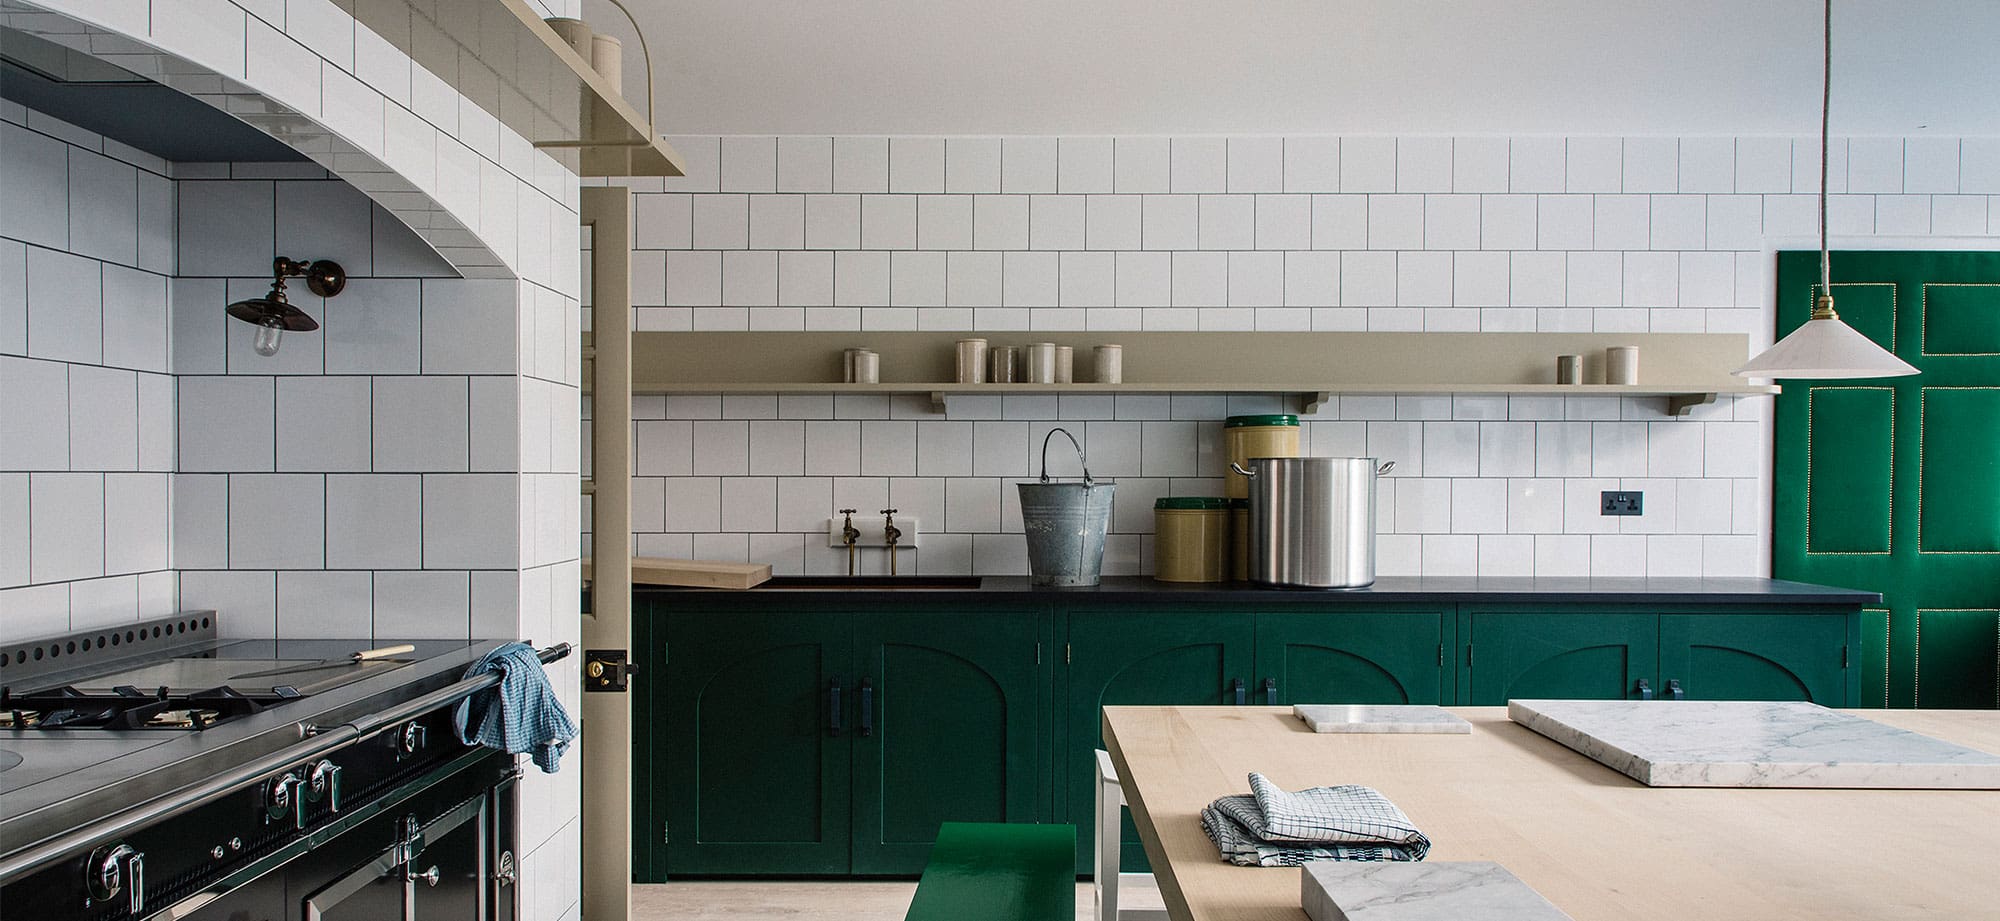 The Kew kitchen by Plain English Design at Pimlico Road Showroom London